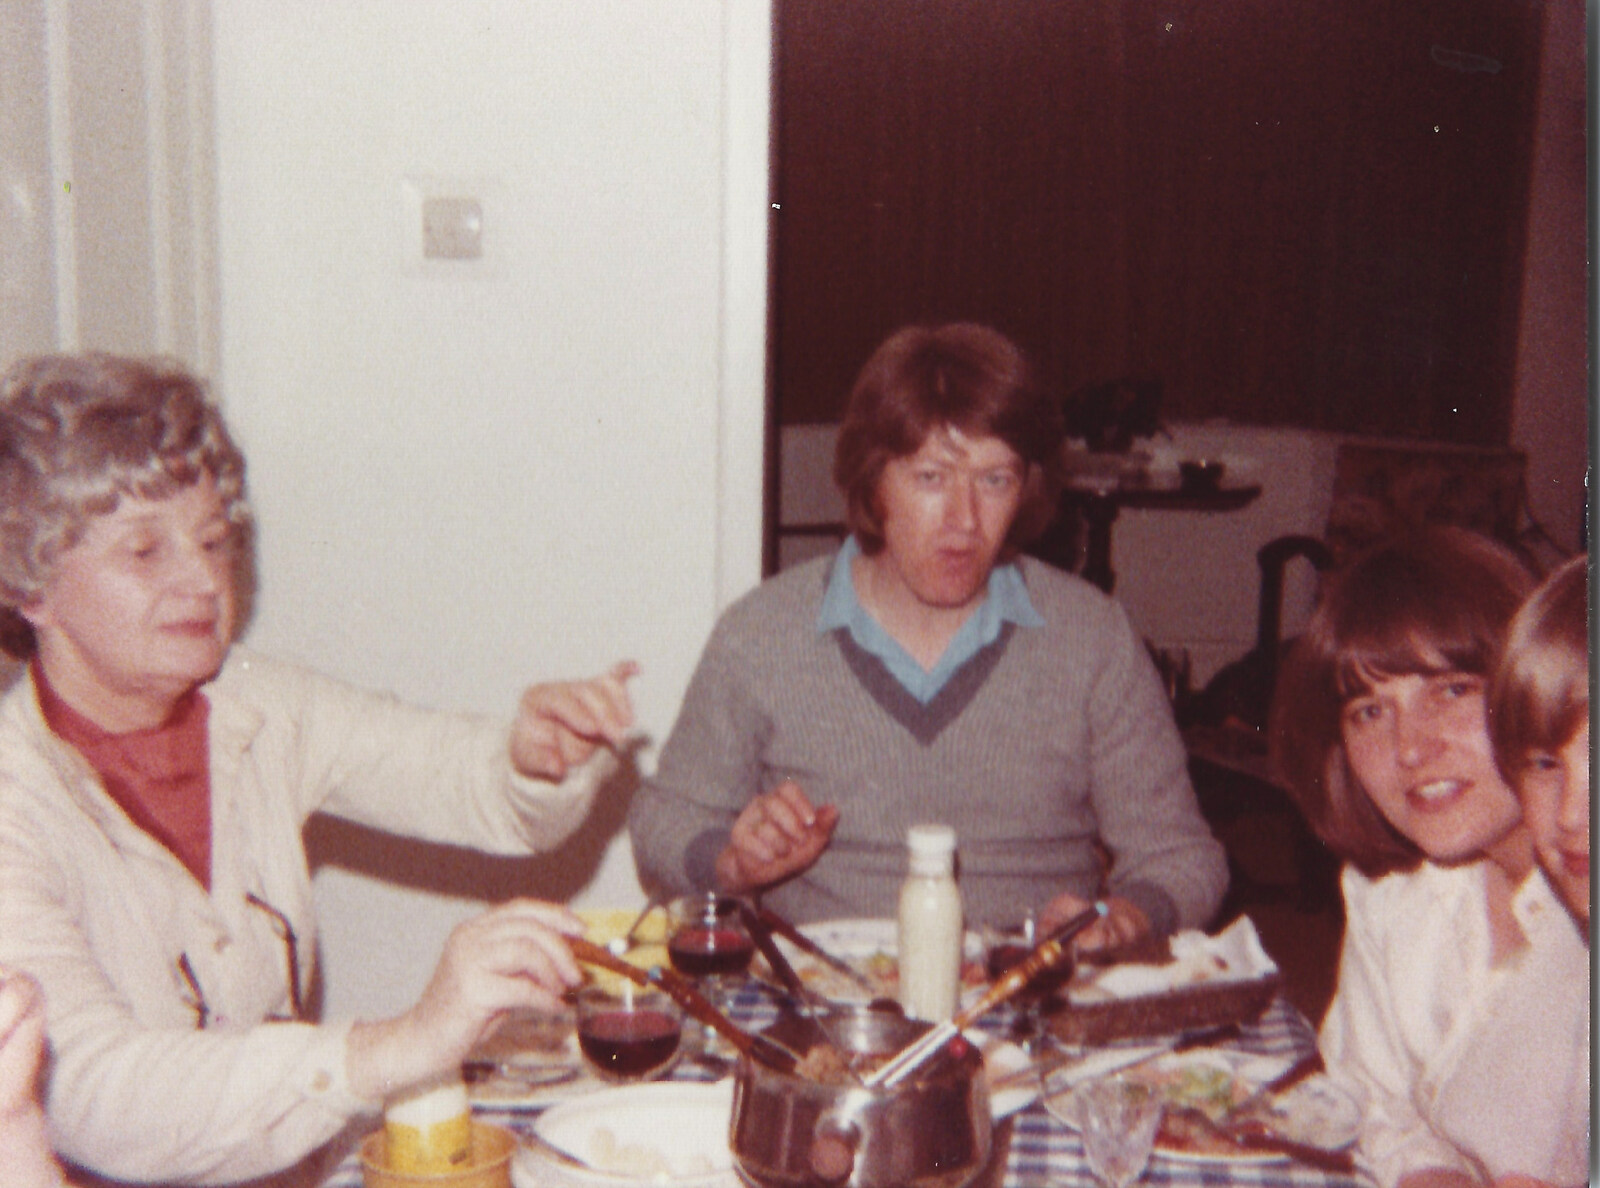 Family History: The 1970s, Timperley and Sandbach, Cheshire - 24th January 2020: Grandmother, Neil and Caroline